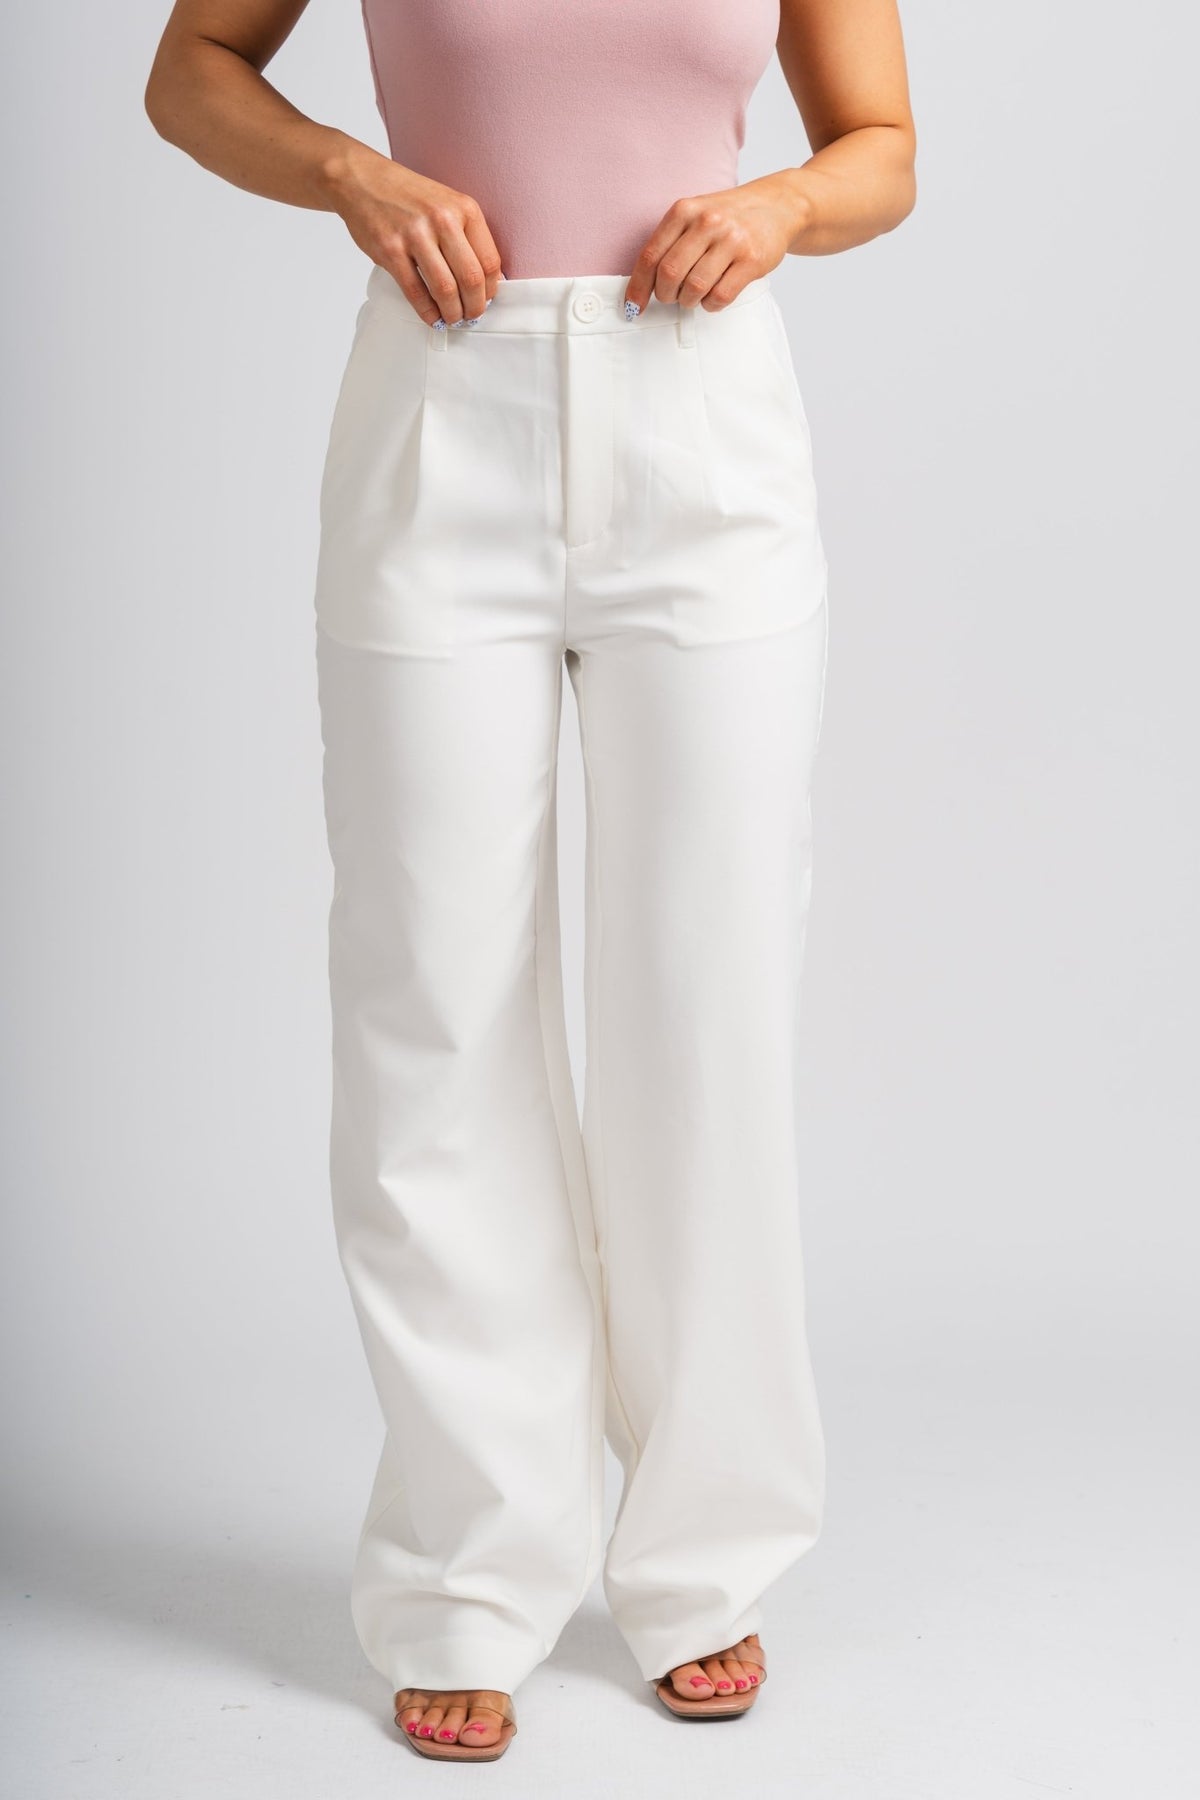 Stylish White Lace Linen Embroidered Linen Pants Women For Women